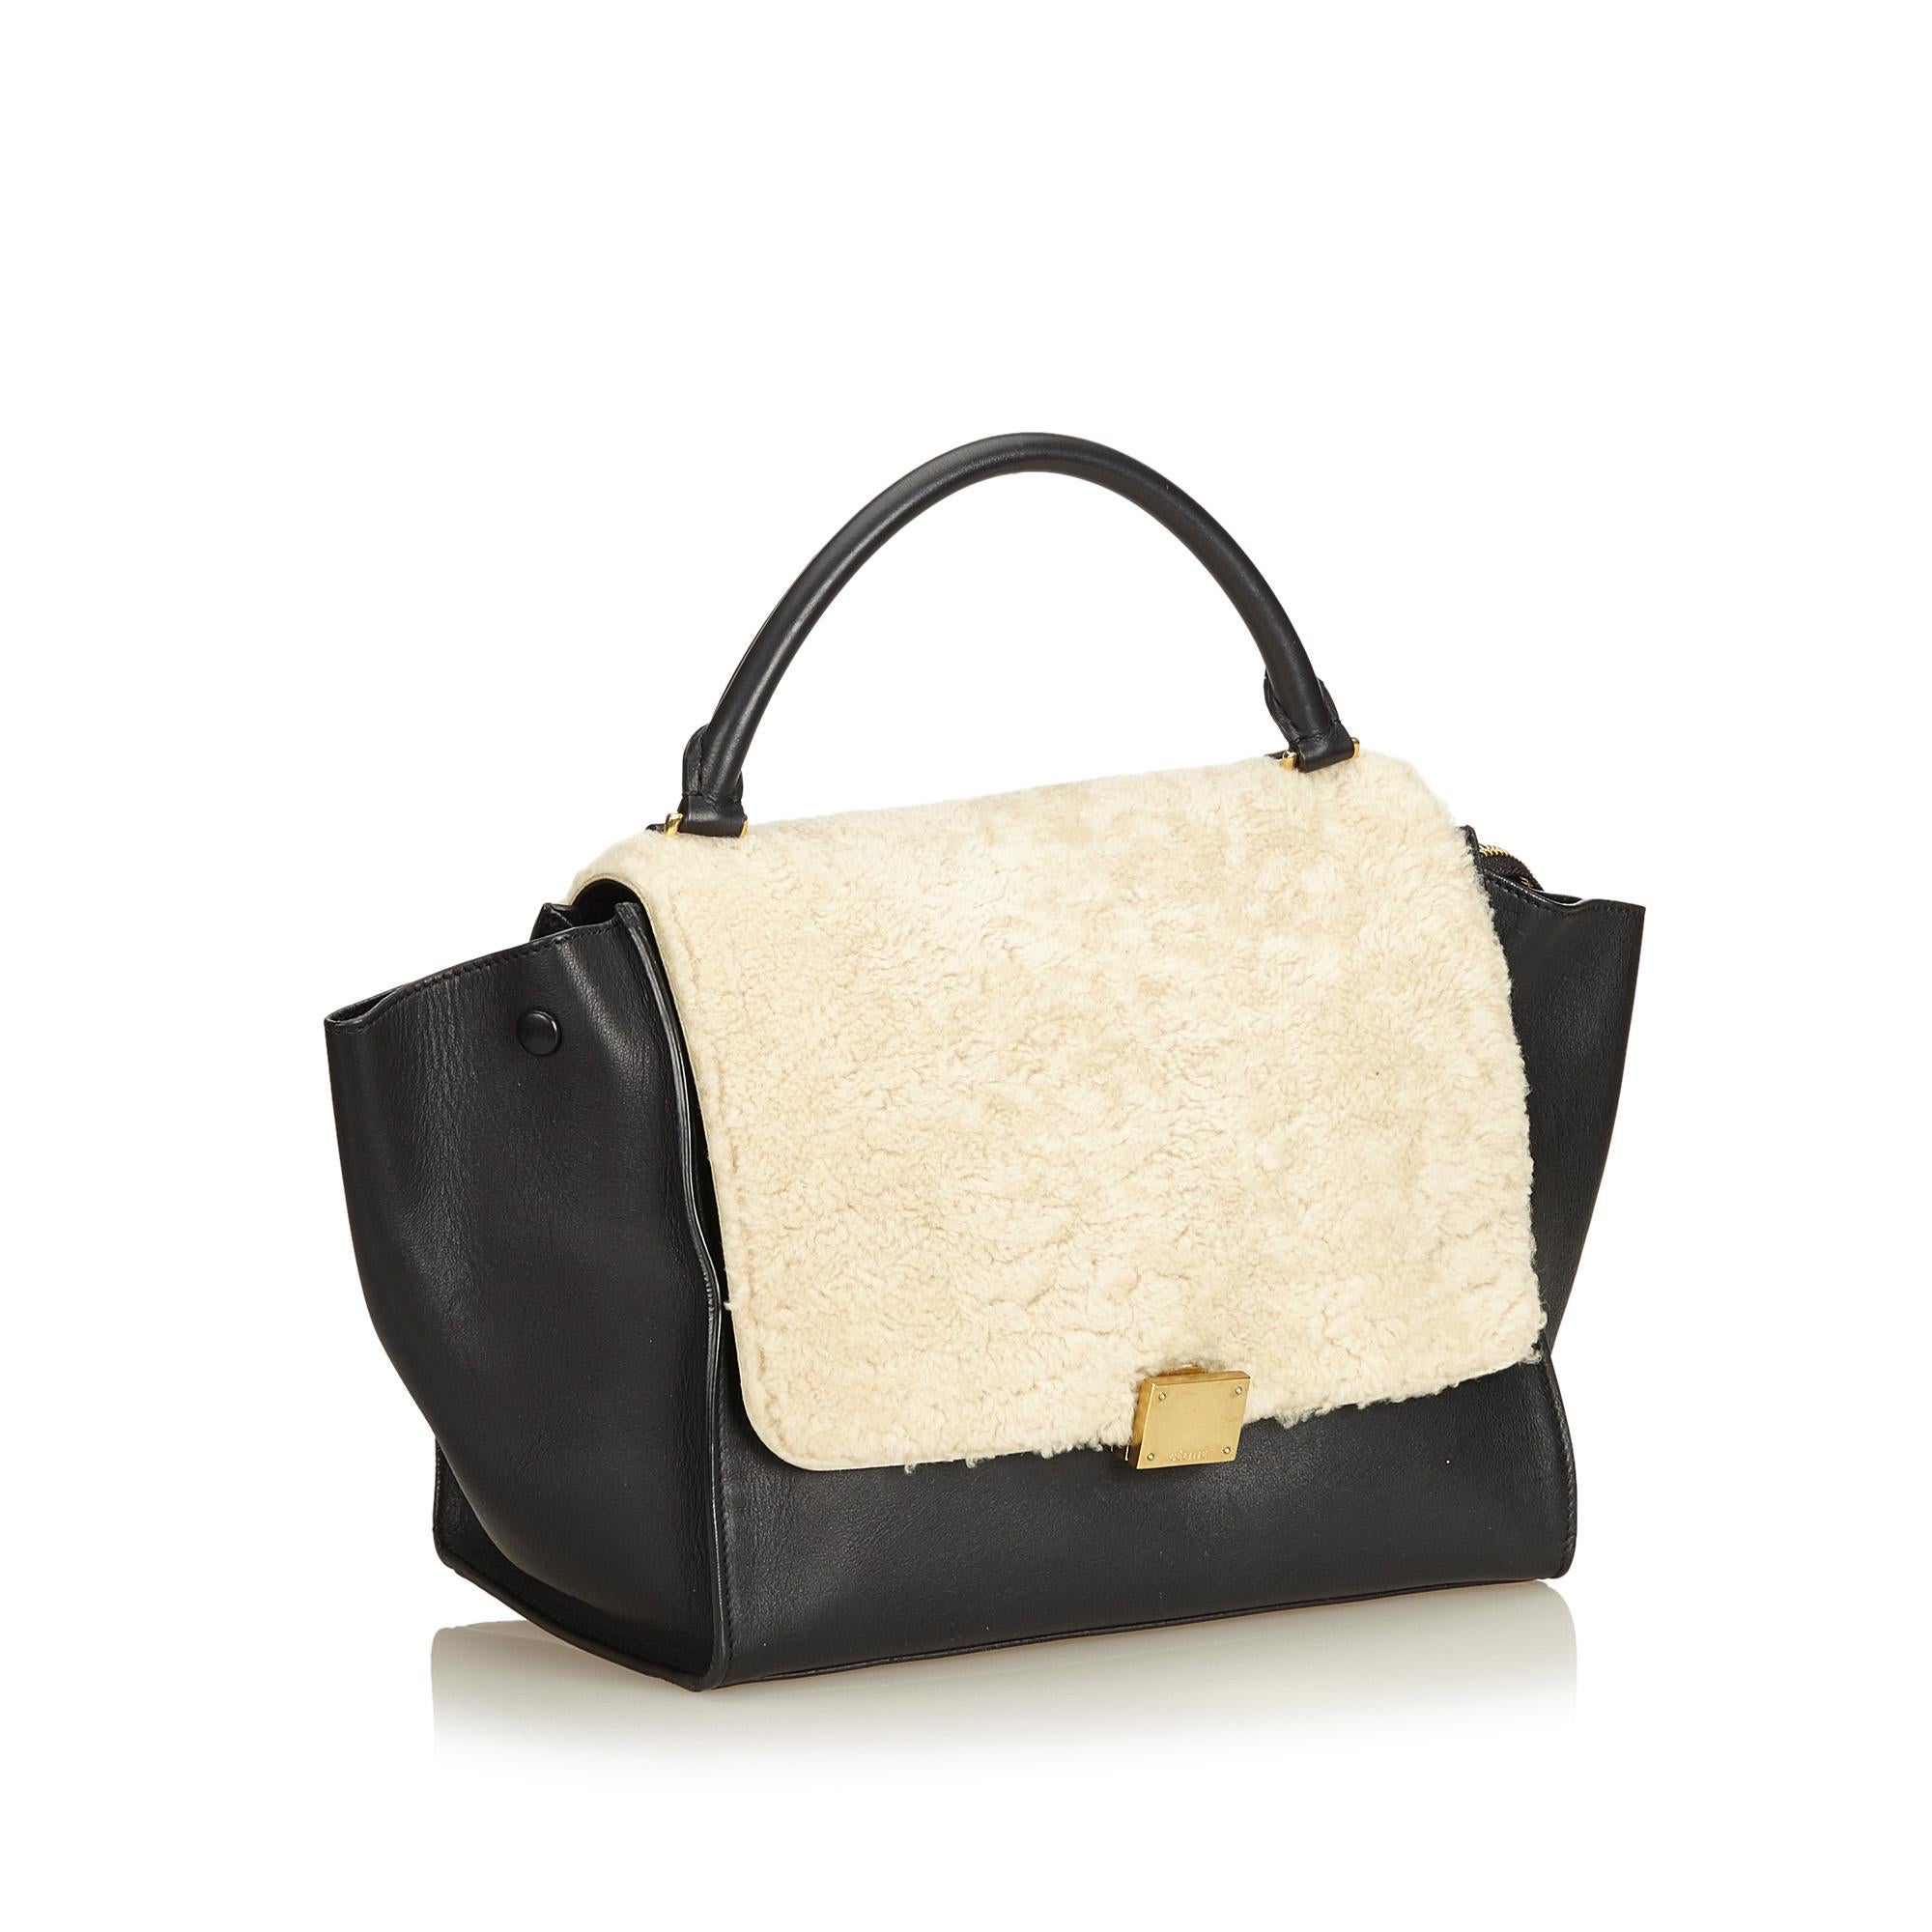 The Trapeze features a leather body with shearling panel at front, single rolled top handle, detachable flat strap, a front flap with a clasp closure, top zip closure, and interior slip pockets. It carries as B+ condition rating.

Inclusions: 
Dust